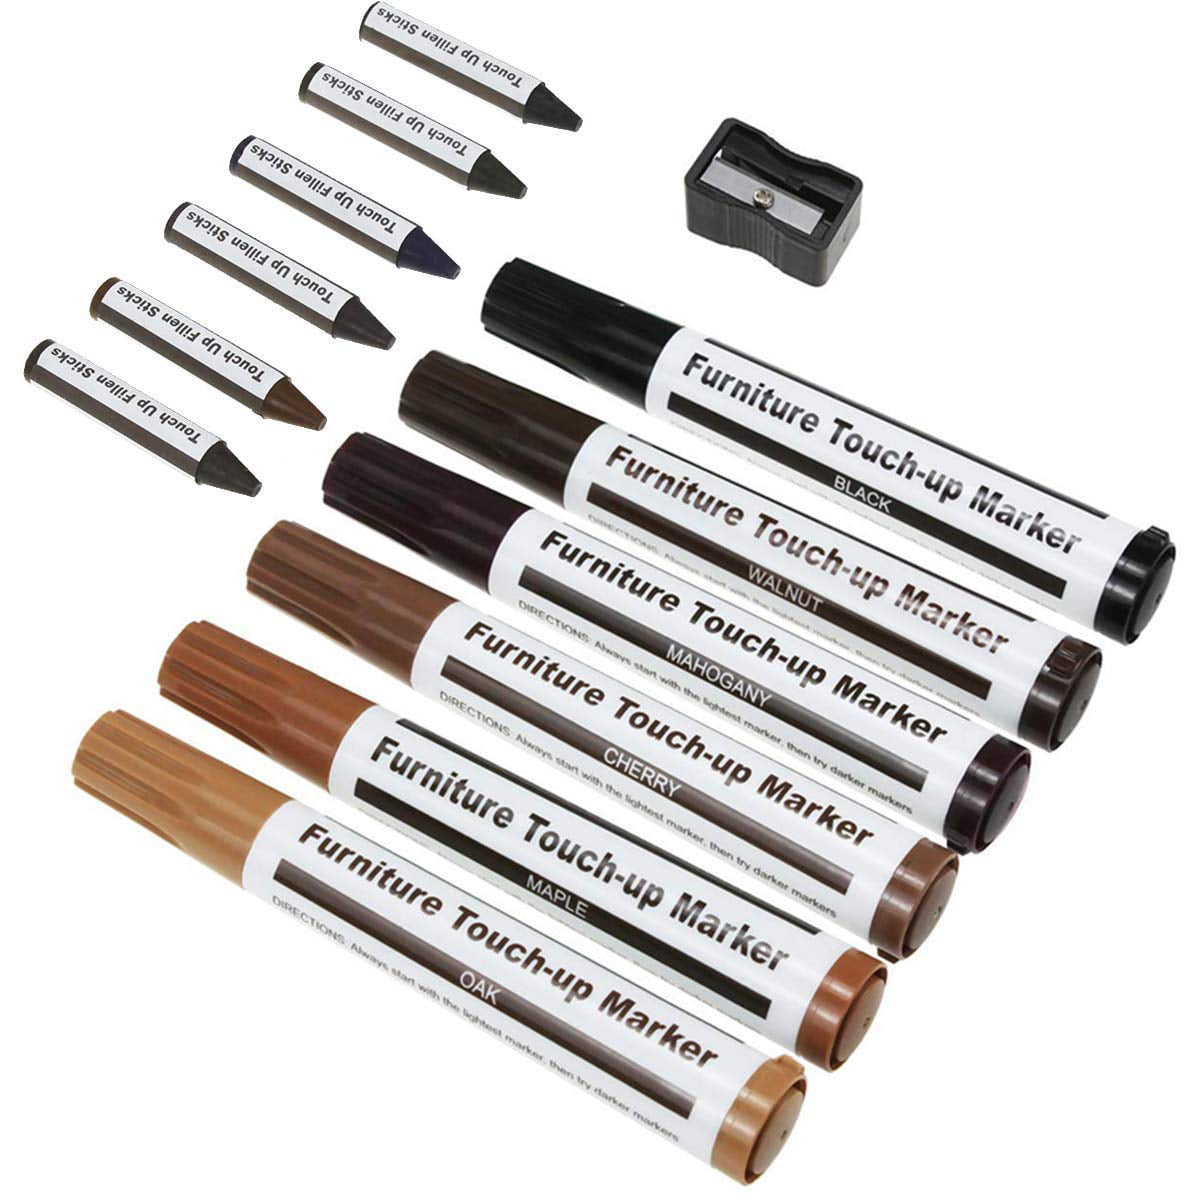 Ixir Furniture Repair Markers and Wax Sticks with Sharpener for Stains, Scratches, Wood Floor, Tables, Desks, Maple, Oak, Cherry, Walnut, Black